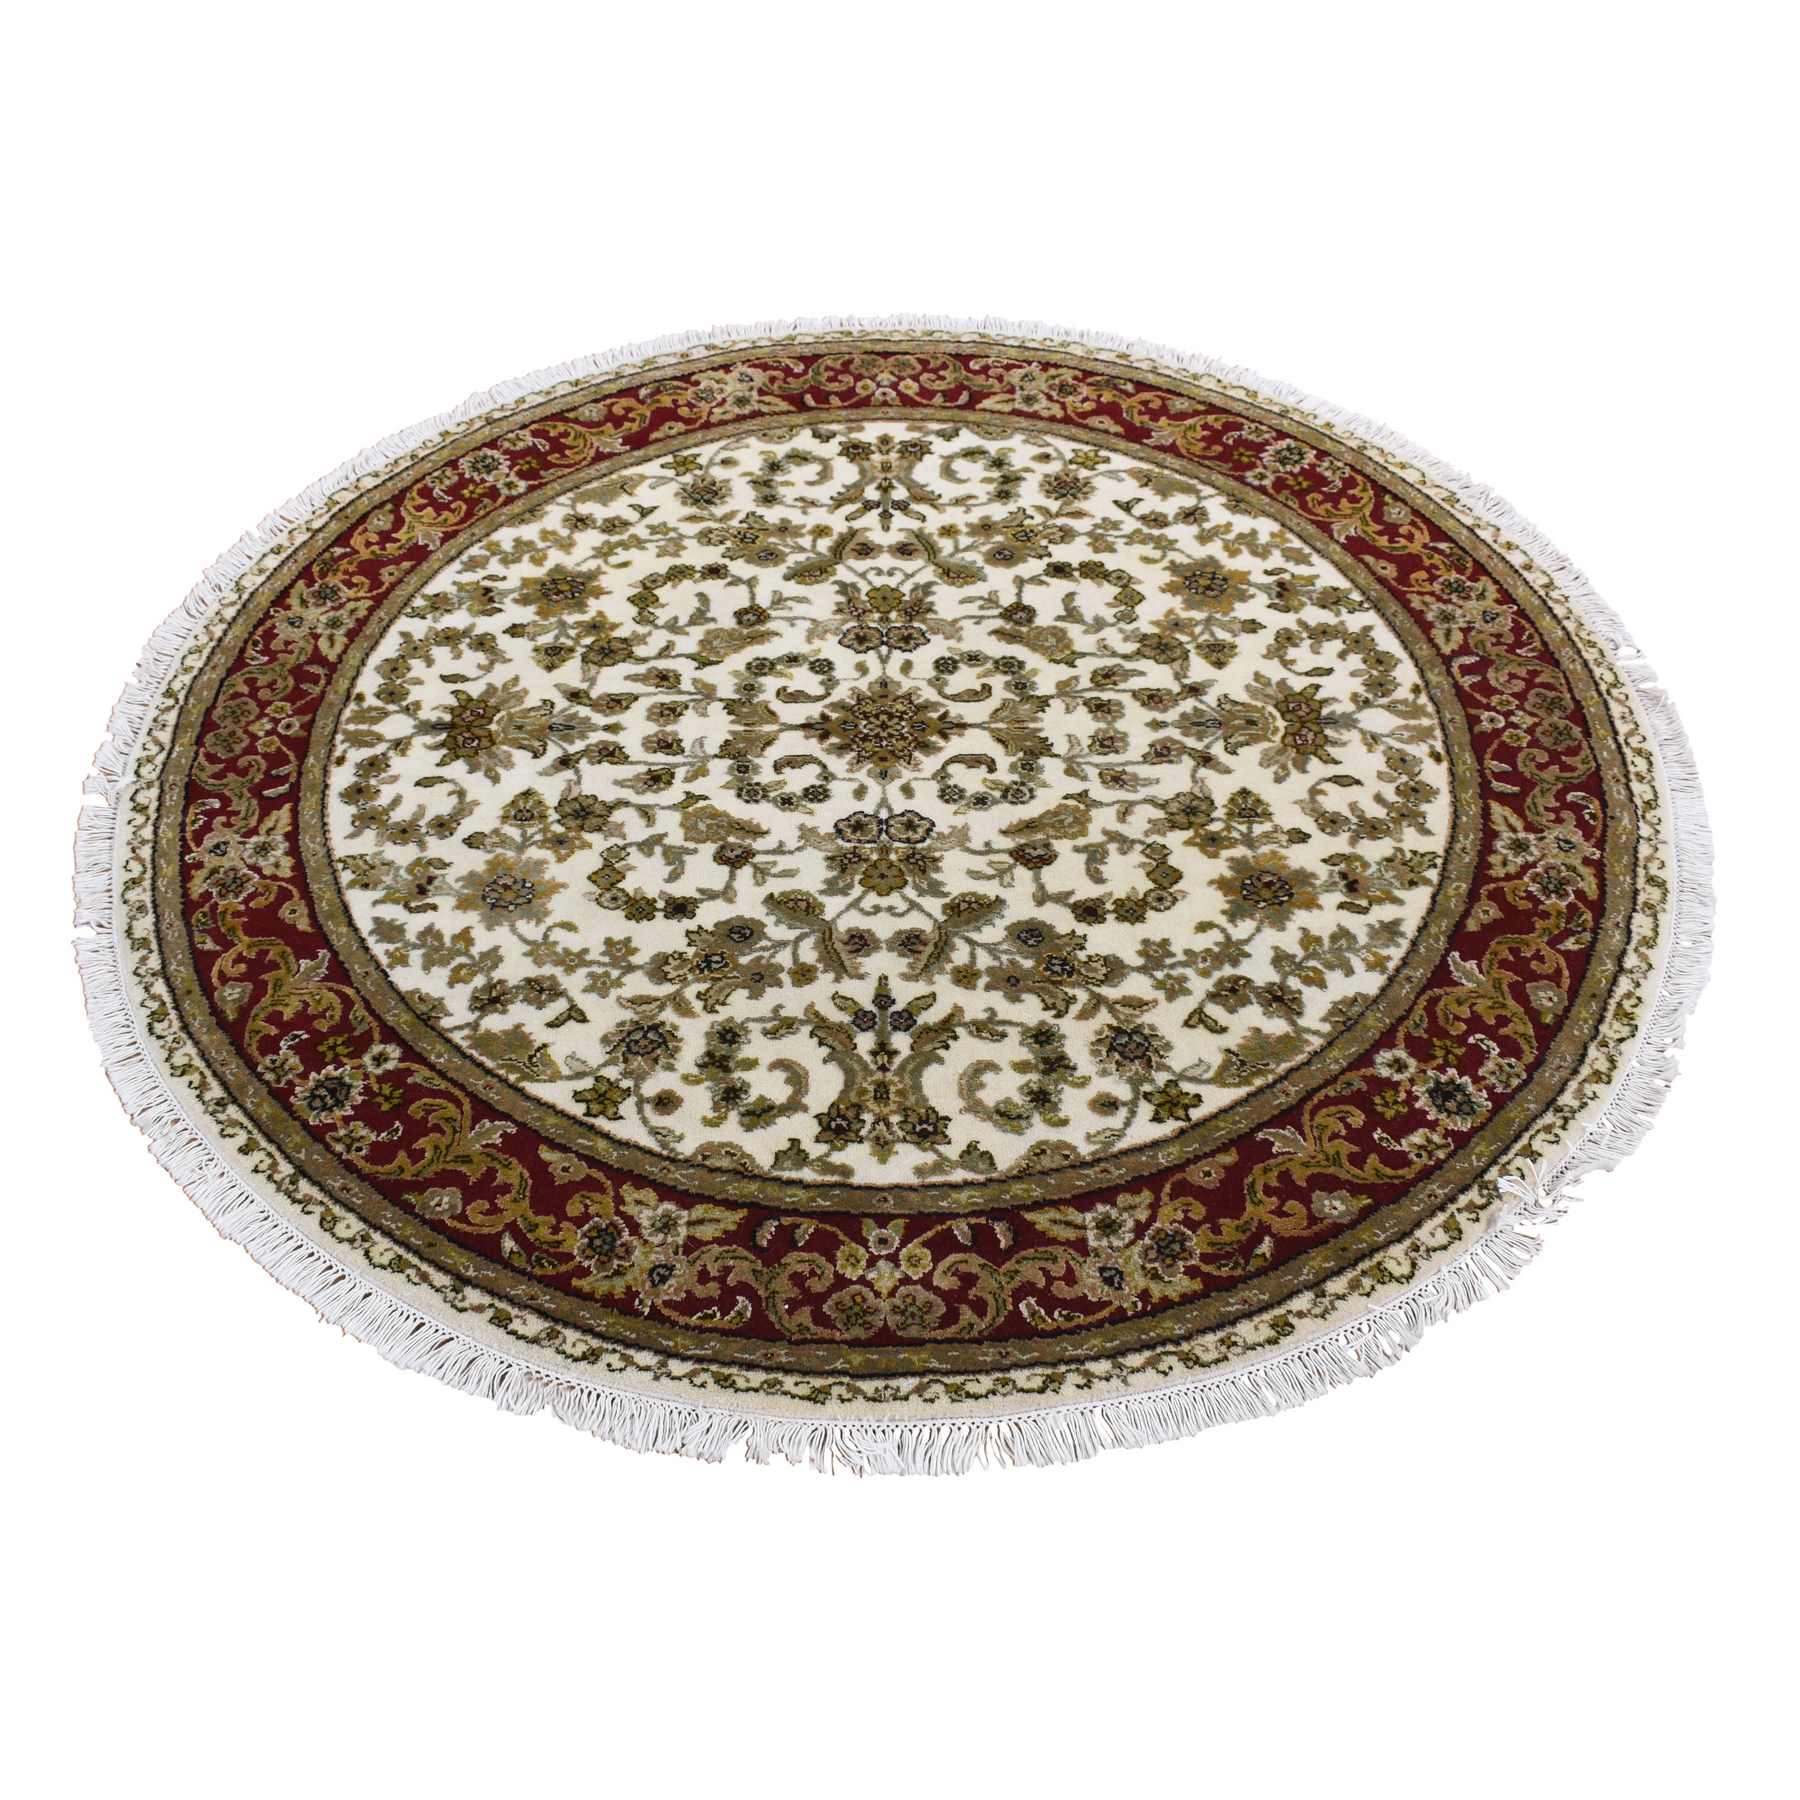 Rajasthan-Hand-Knotted-Rug-438550